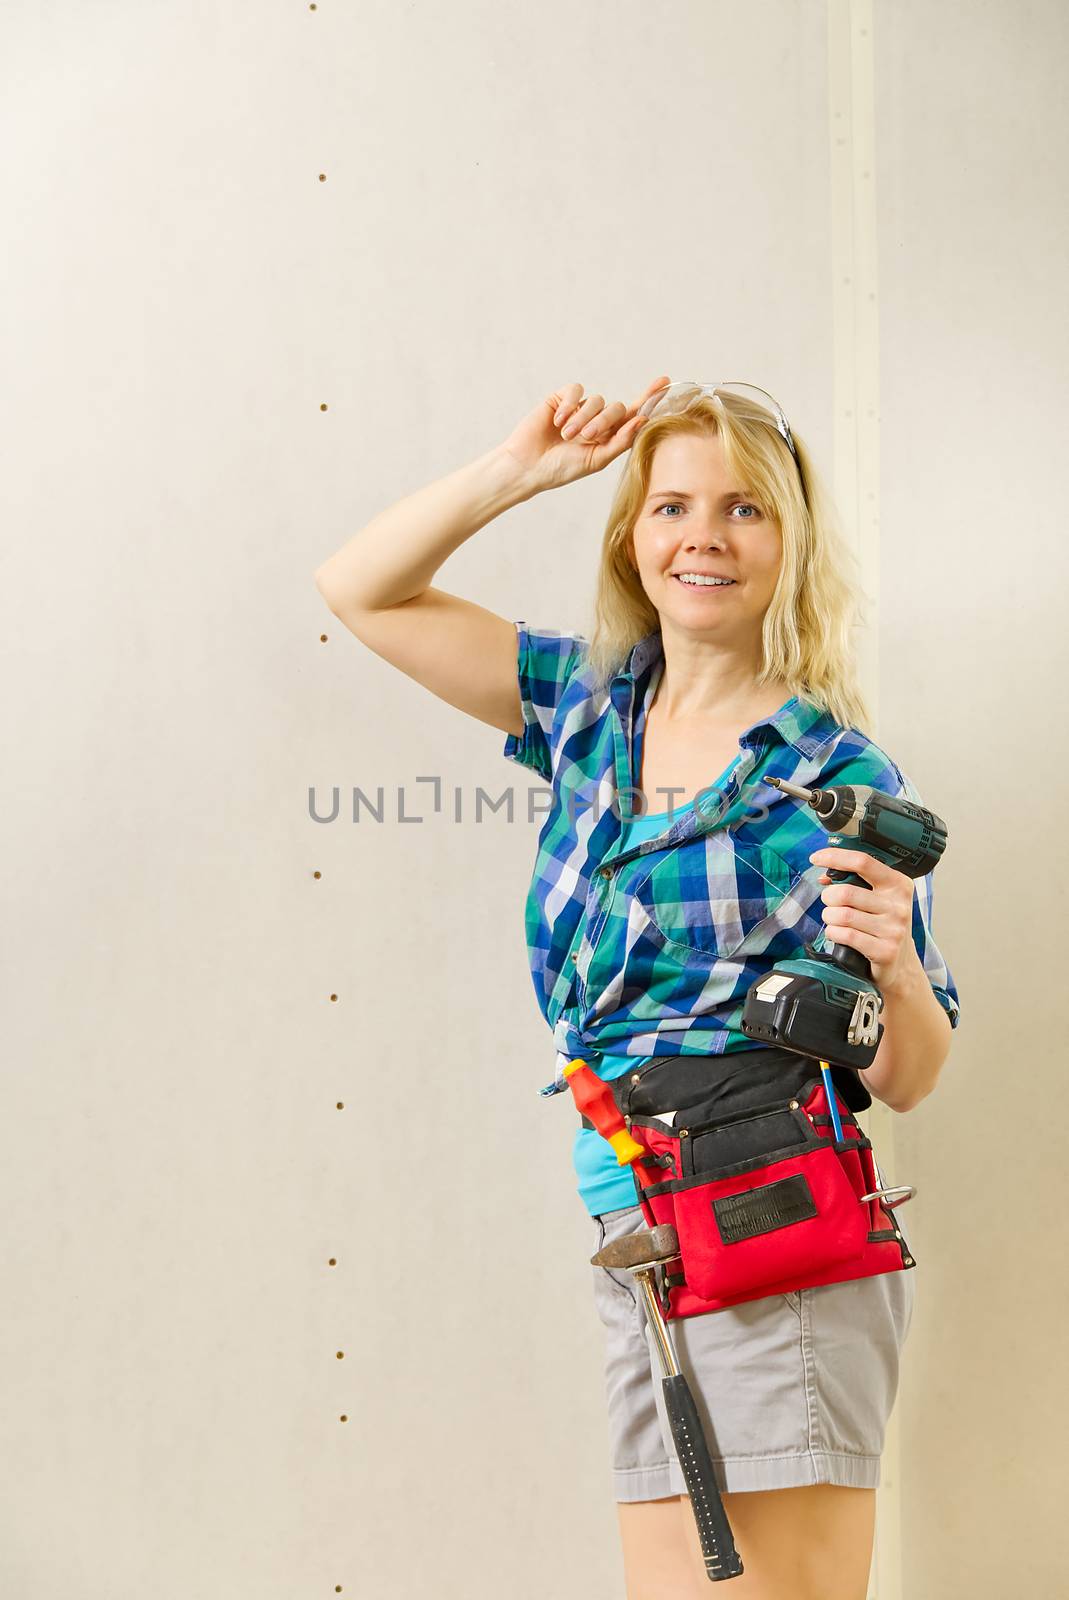 Blond woman wearing a DIY tool belt full of a variety of tools on a unpainted plasterboard wall background. Construction woman concept. by PhotoTime